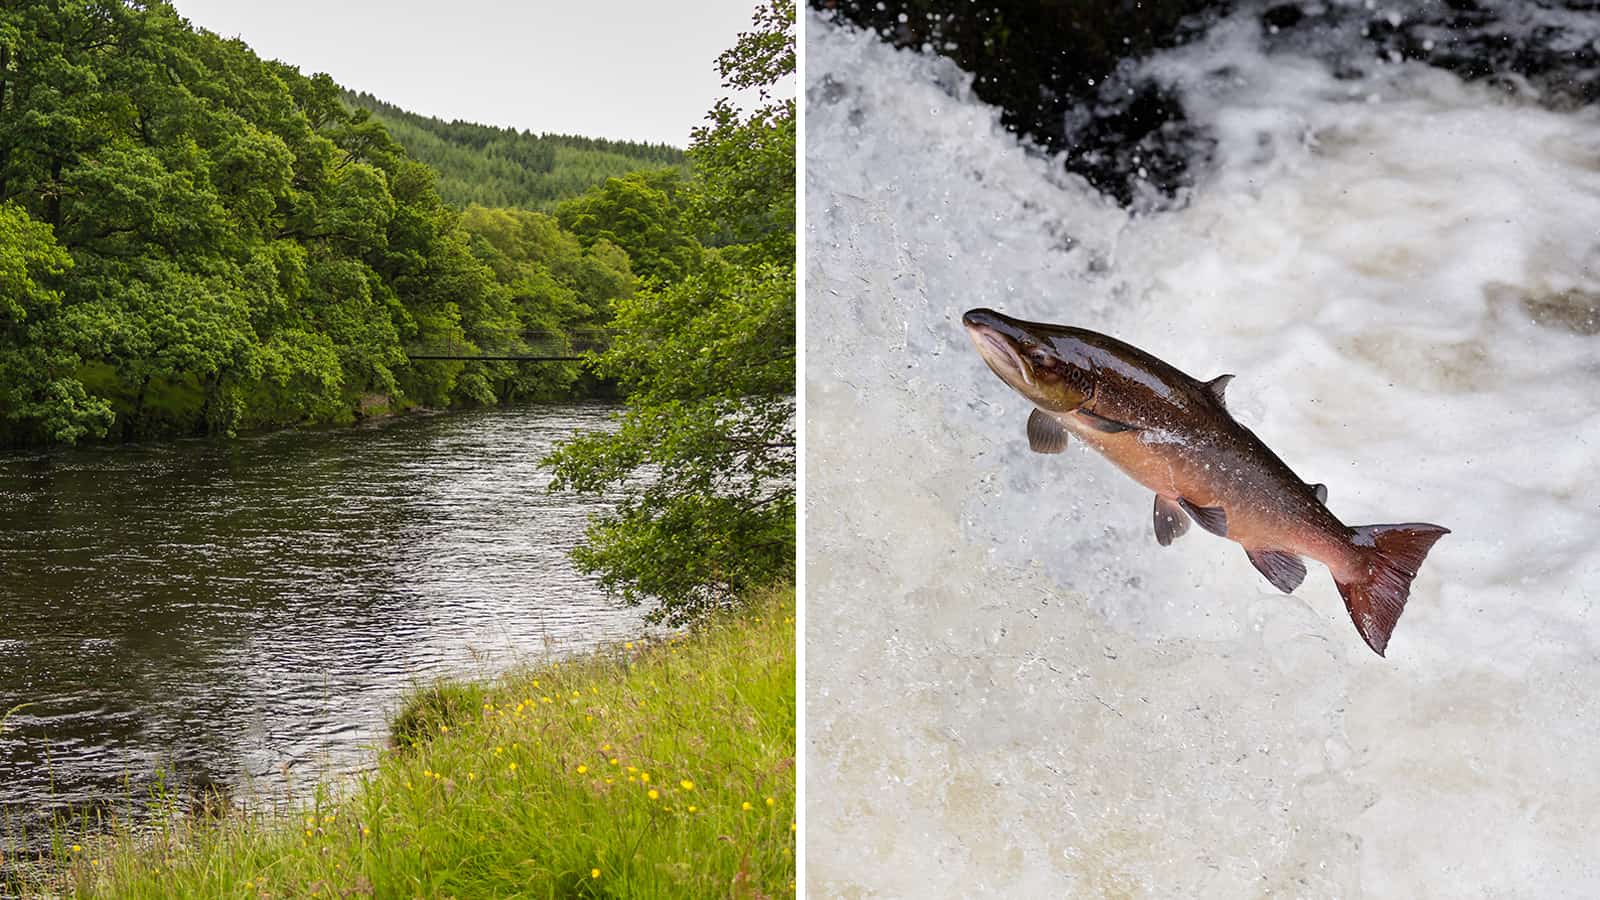 Scotland Saves Their Wild Salmon Population by Planting Trees to Shade Rivers